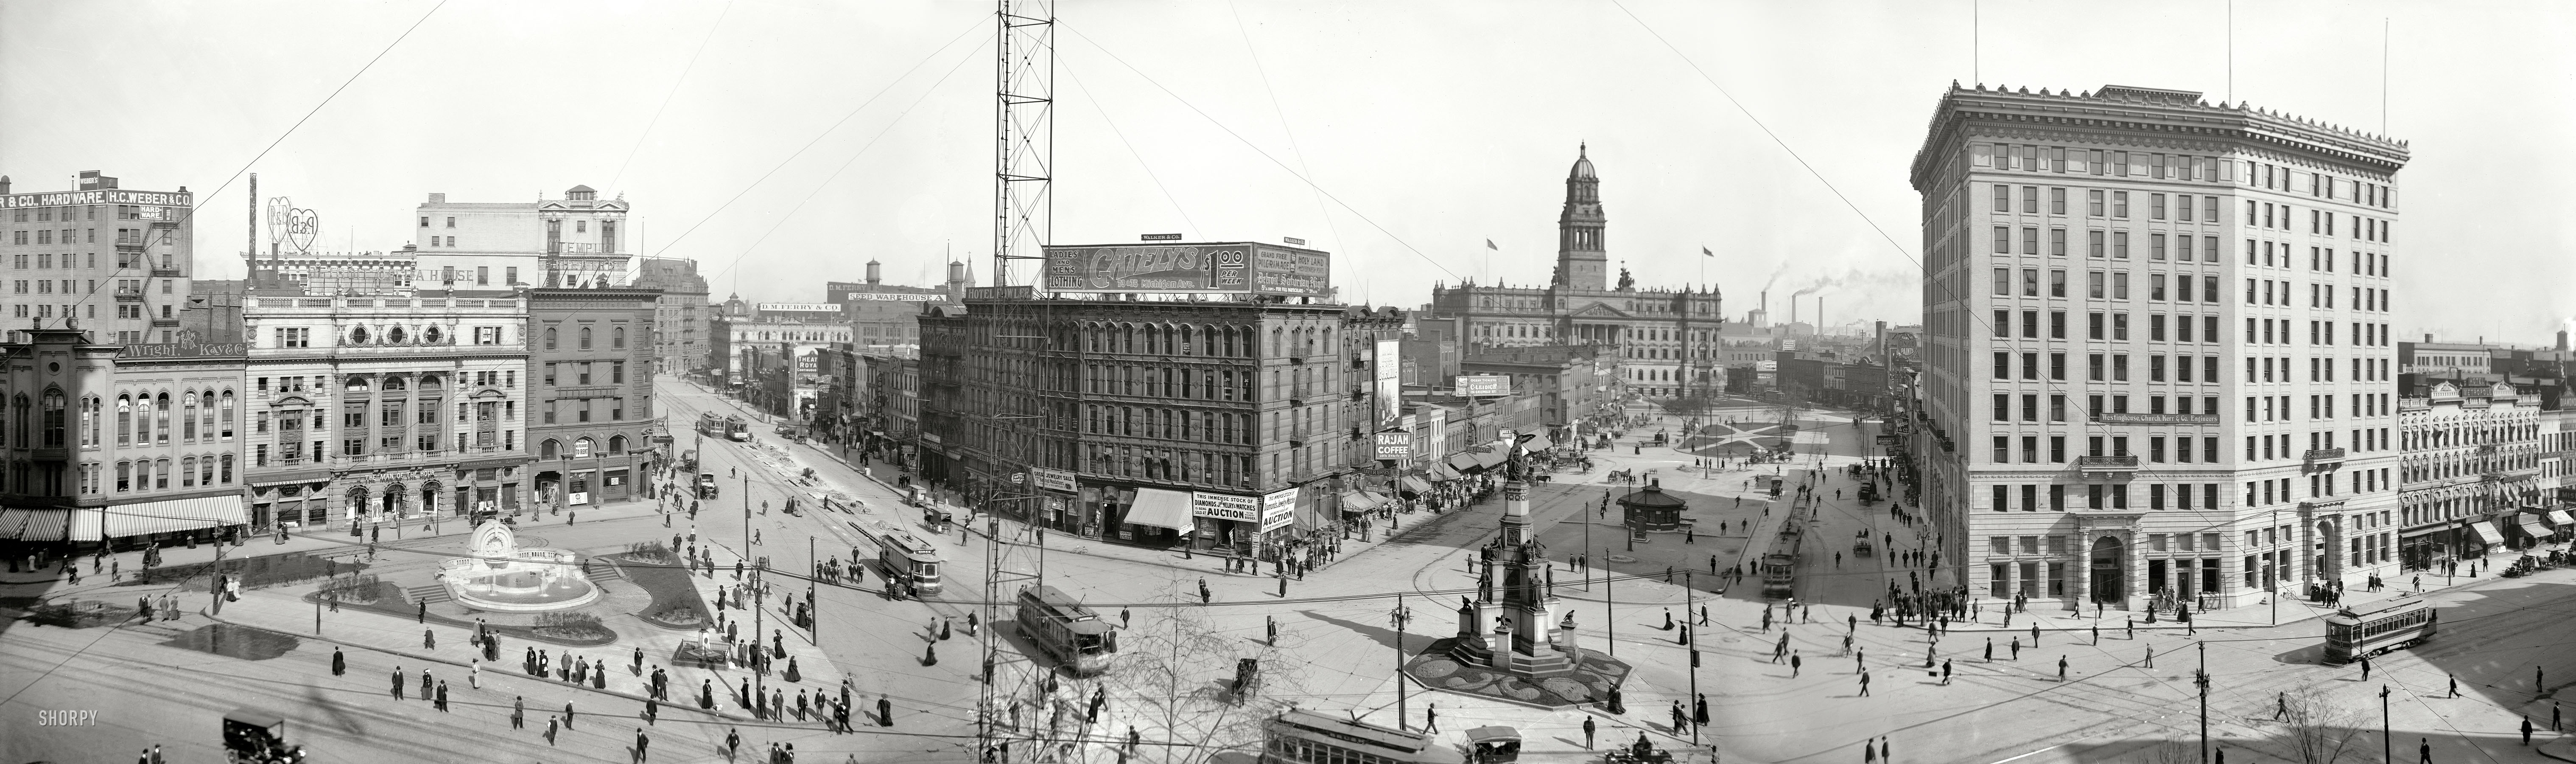 Detroit circa 1907. "The Campus Martius." Landmarks include the Detroit Opera House, Soldiers' and Sailors' Monument, Cadillac Square, Wayne County Building, Hotel Pontchartrain. Panorama of three 8x10 glass negatives. View full size.